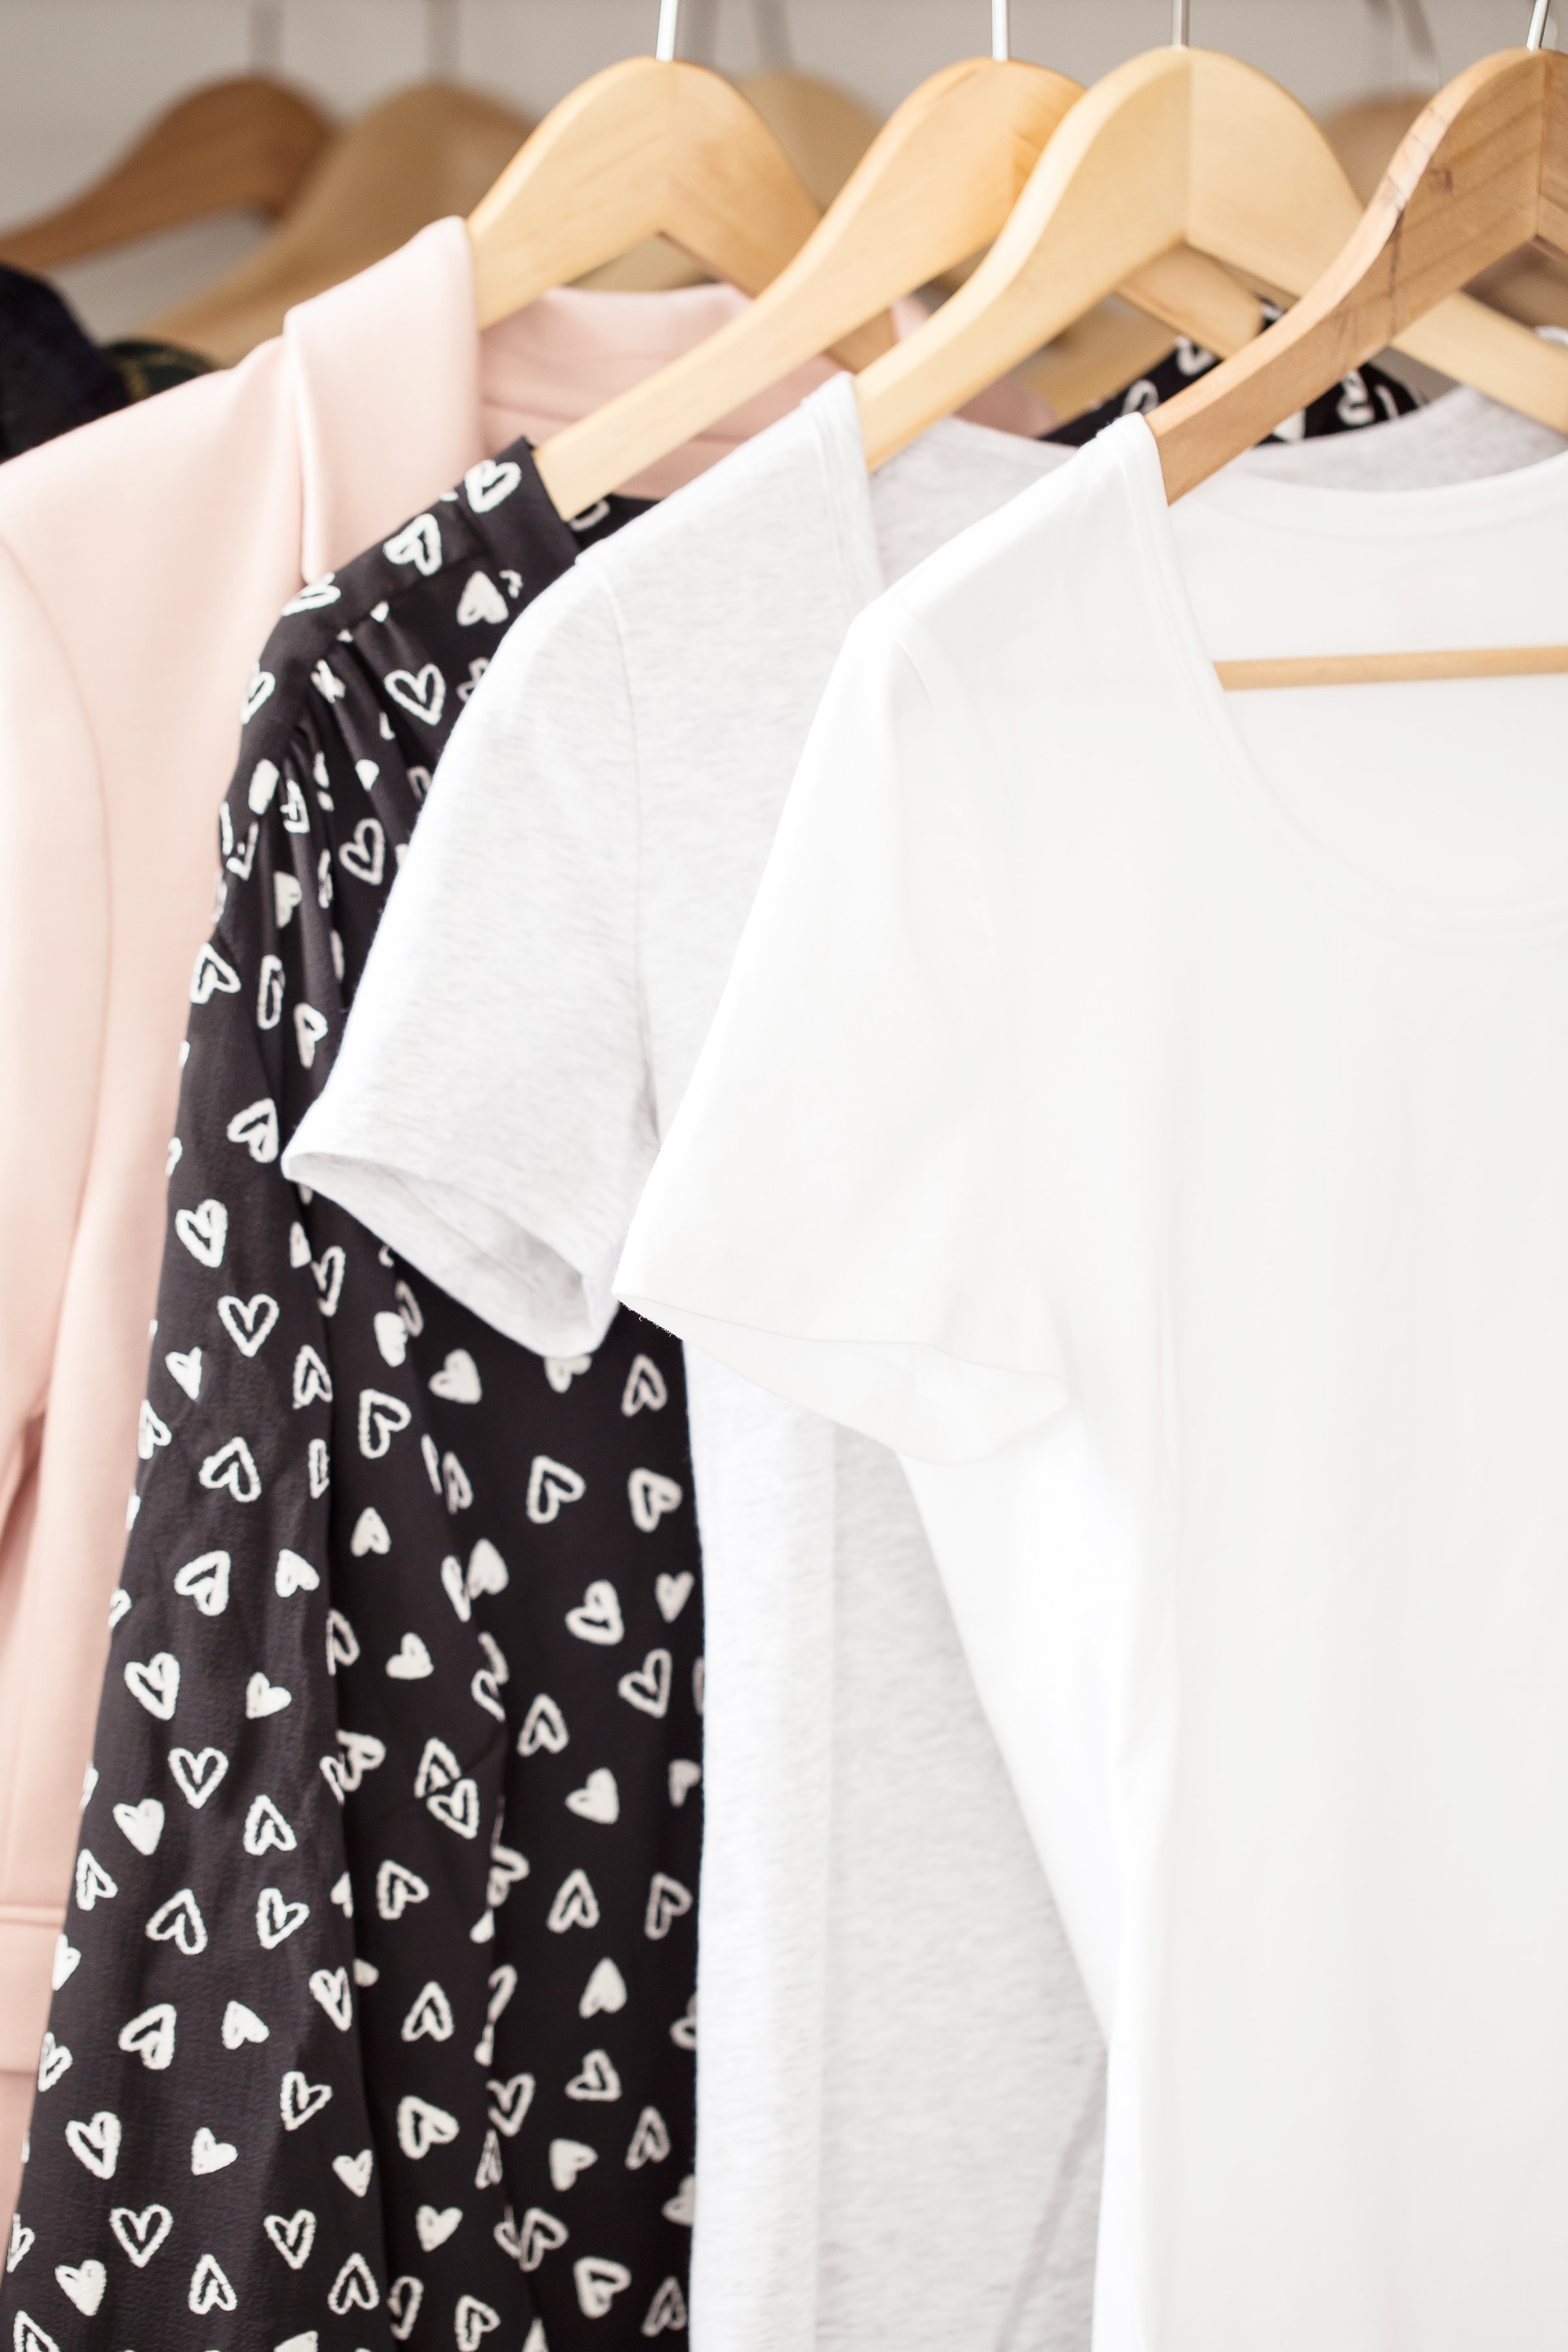 white black and pink women's clothing hangin on wooden hangers in closet